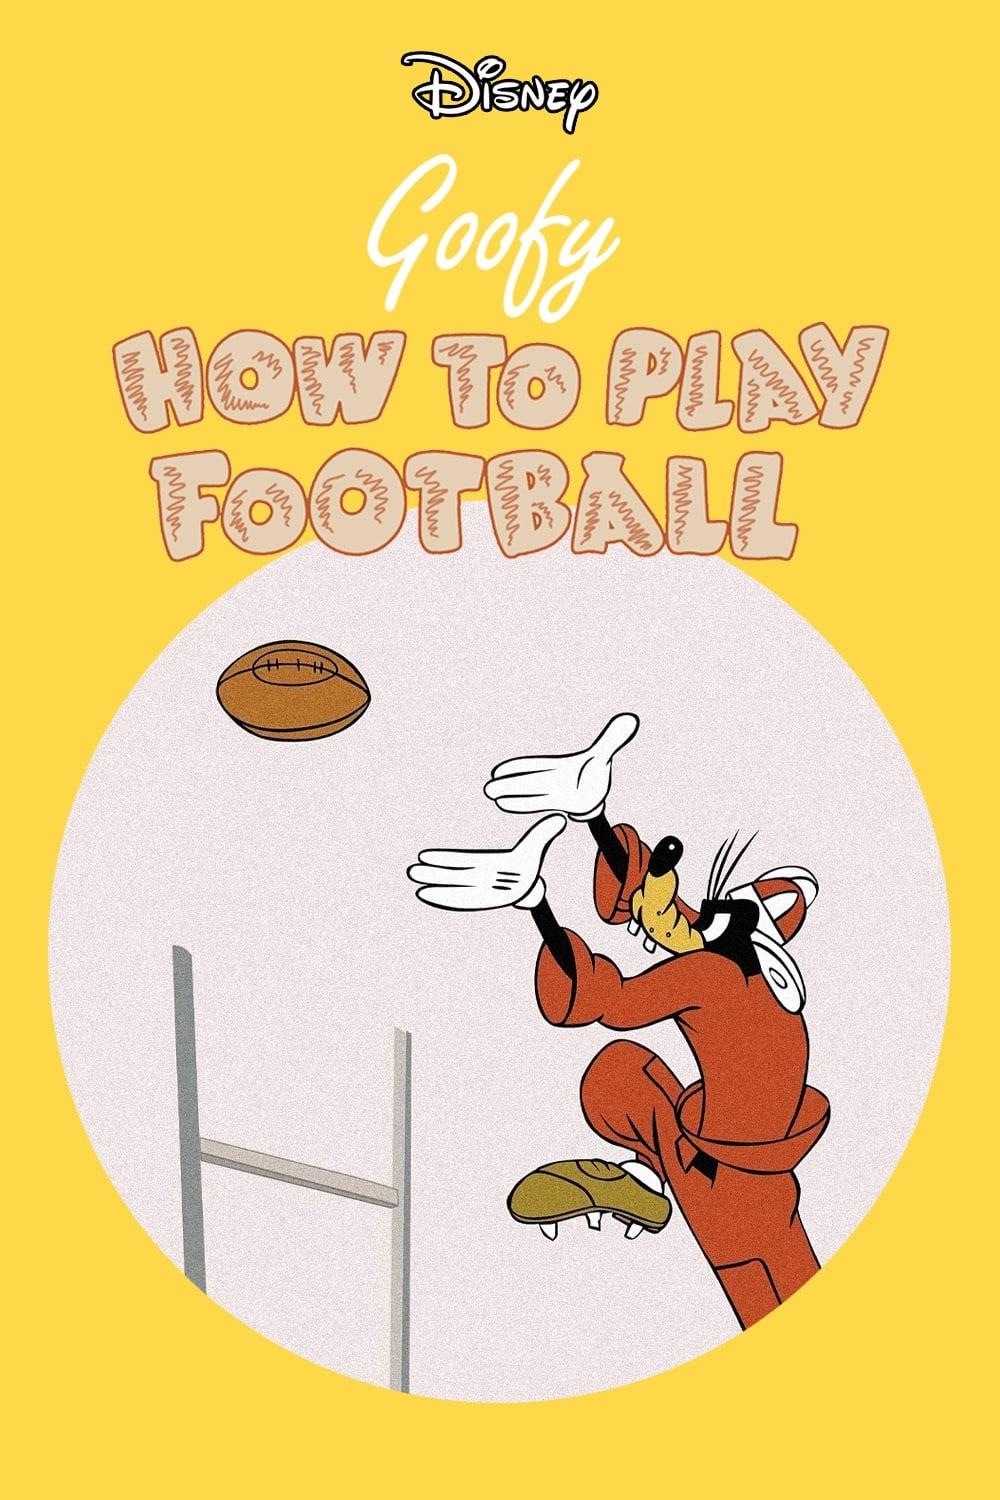 How to Play Football poster